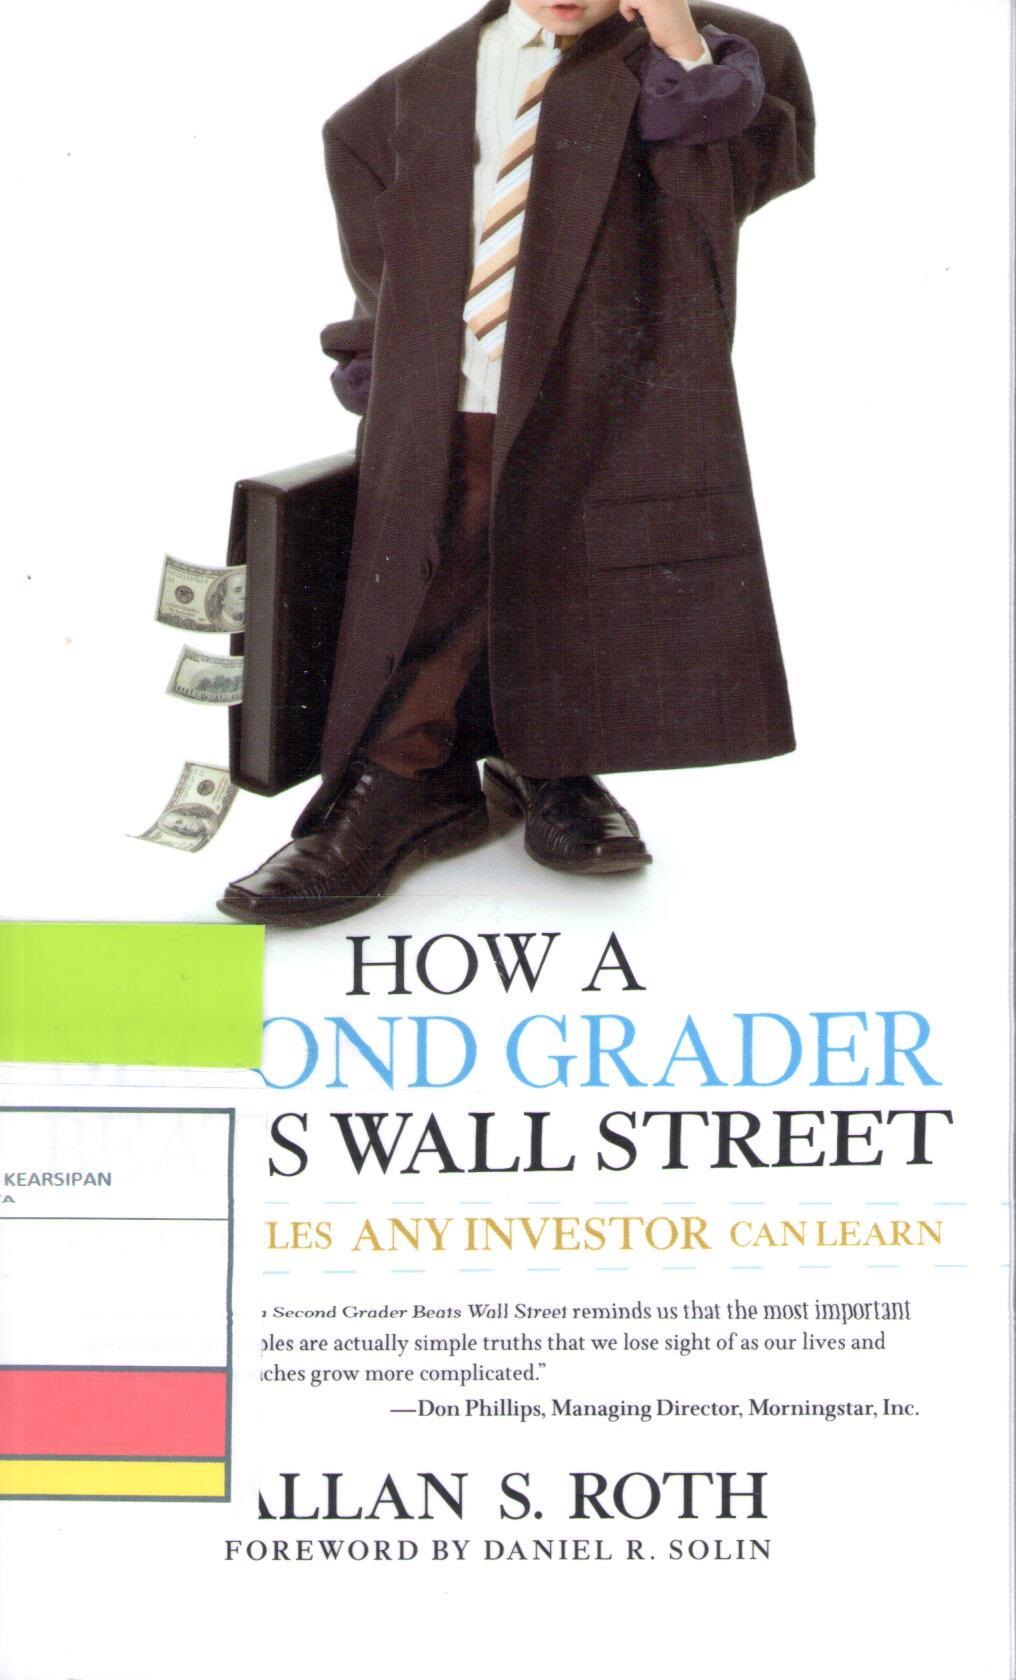 How a Second Grader Beats Wall Street :  Golden Rules Any Investor Can Learn